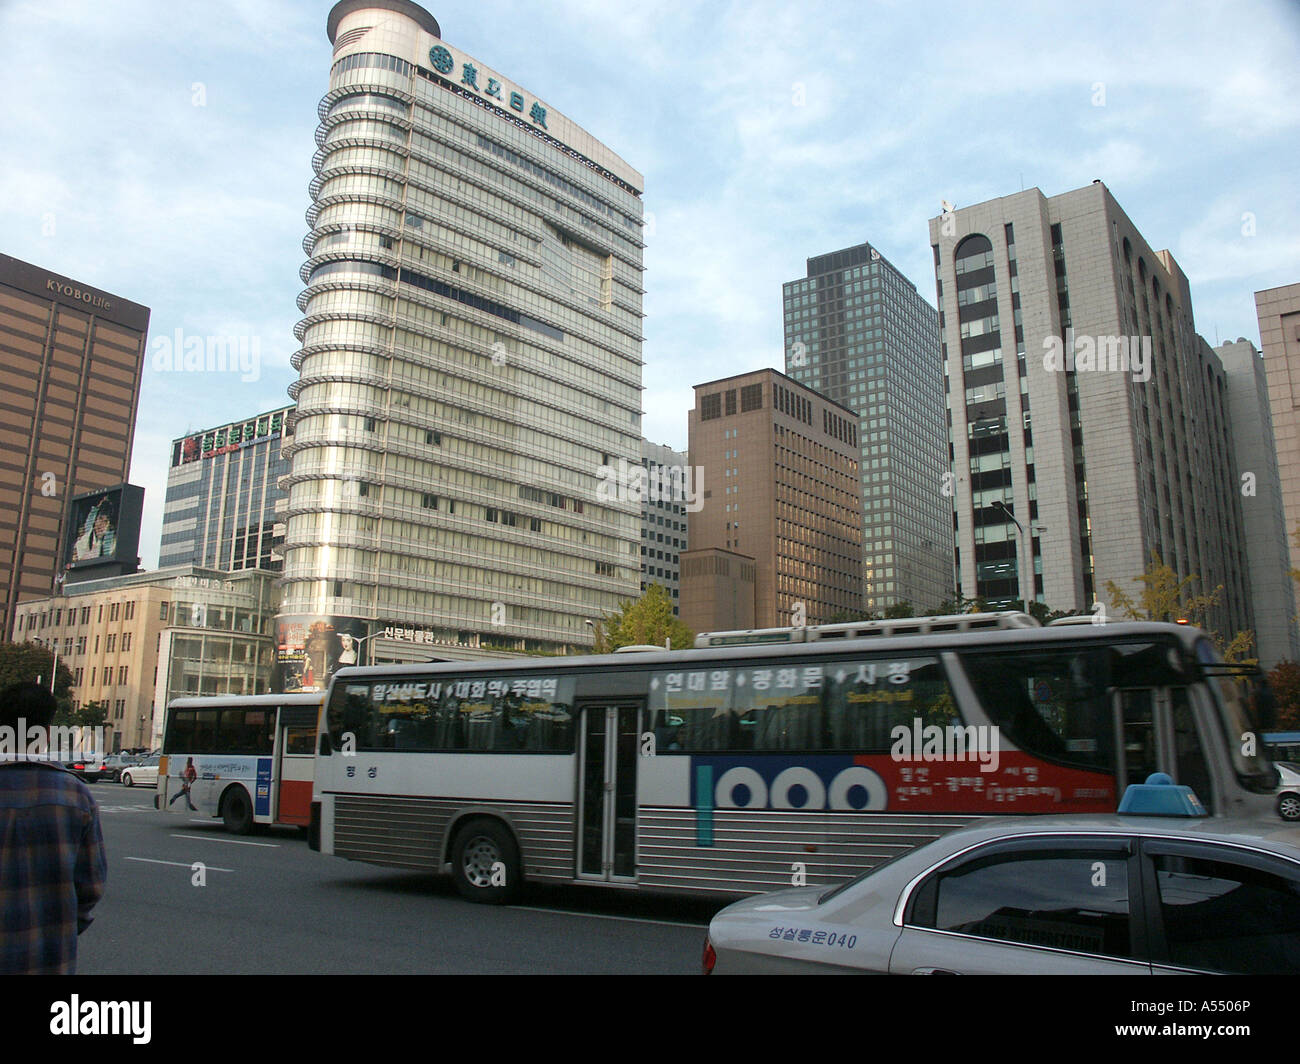 Painet ip2252 korea downtown soeul 2003 country developing nation less economically developed culture emerging market Stock Photo